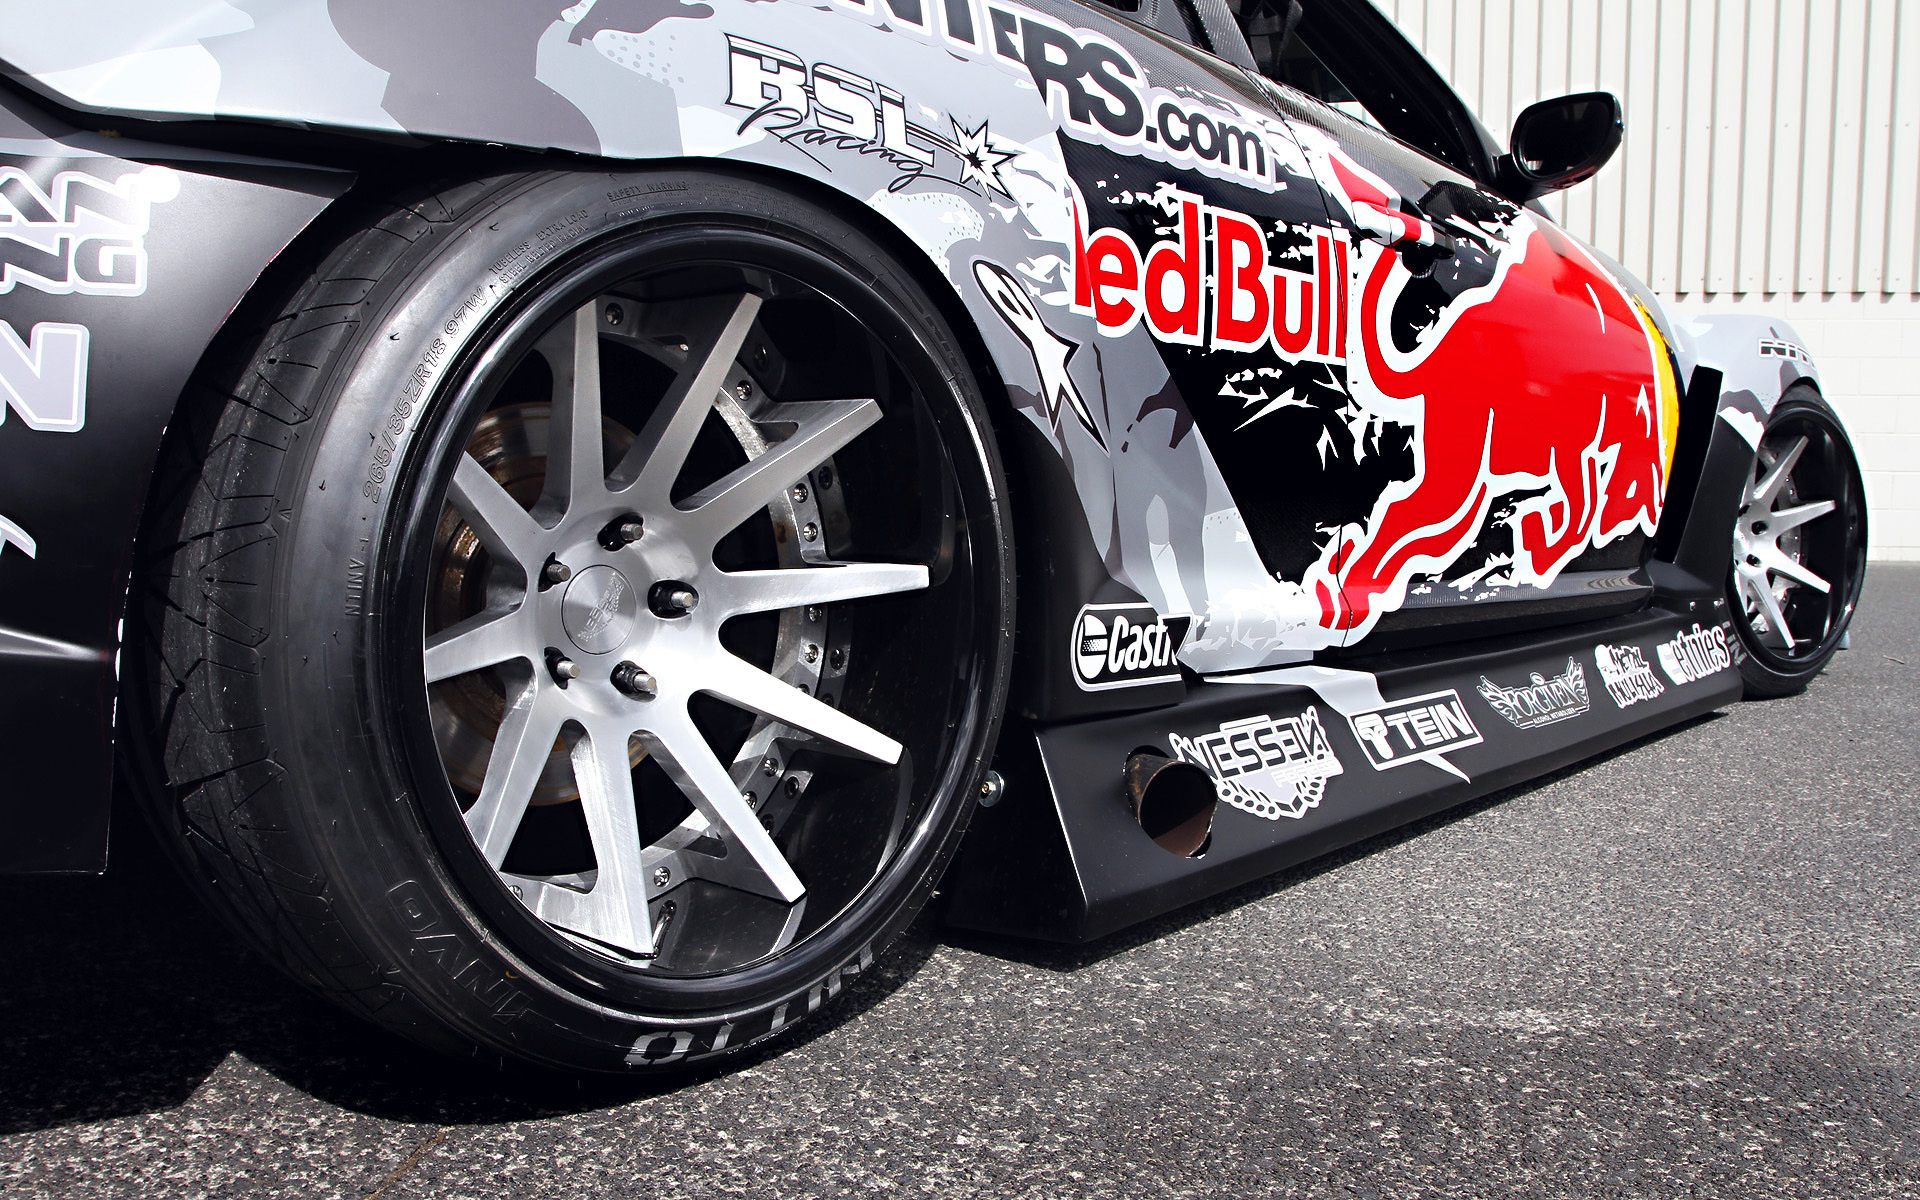 widebody, sportcar, rx-8, red-bull racing, drift, competition, team, spoiler, Mazda, wheels, tuning